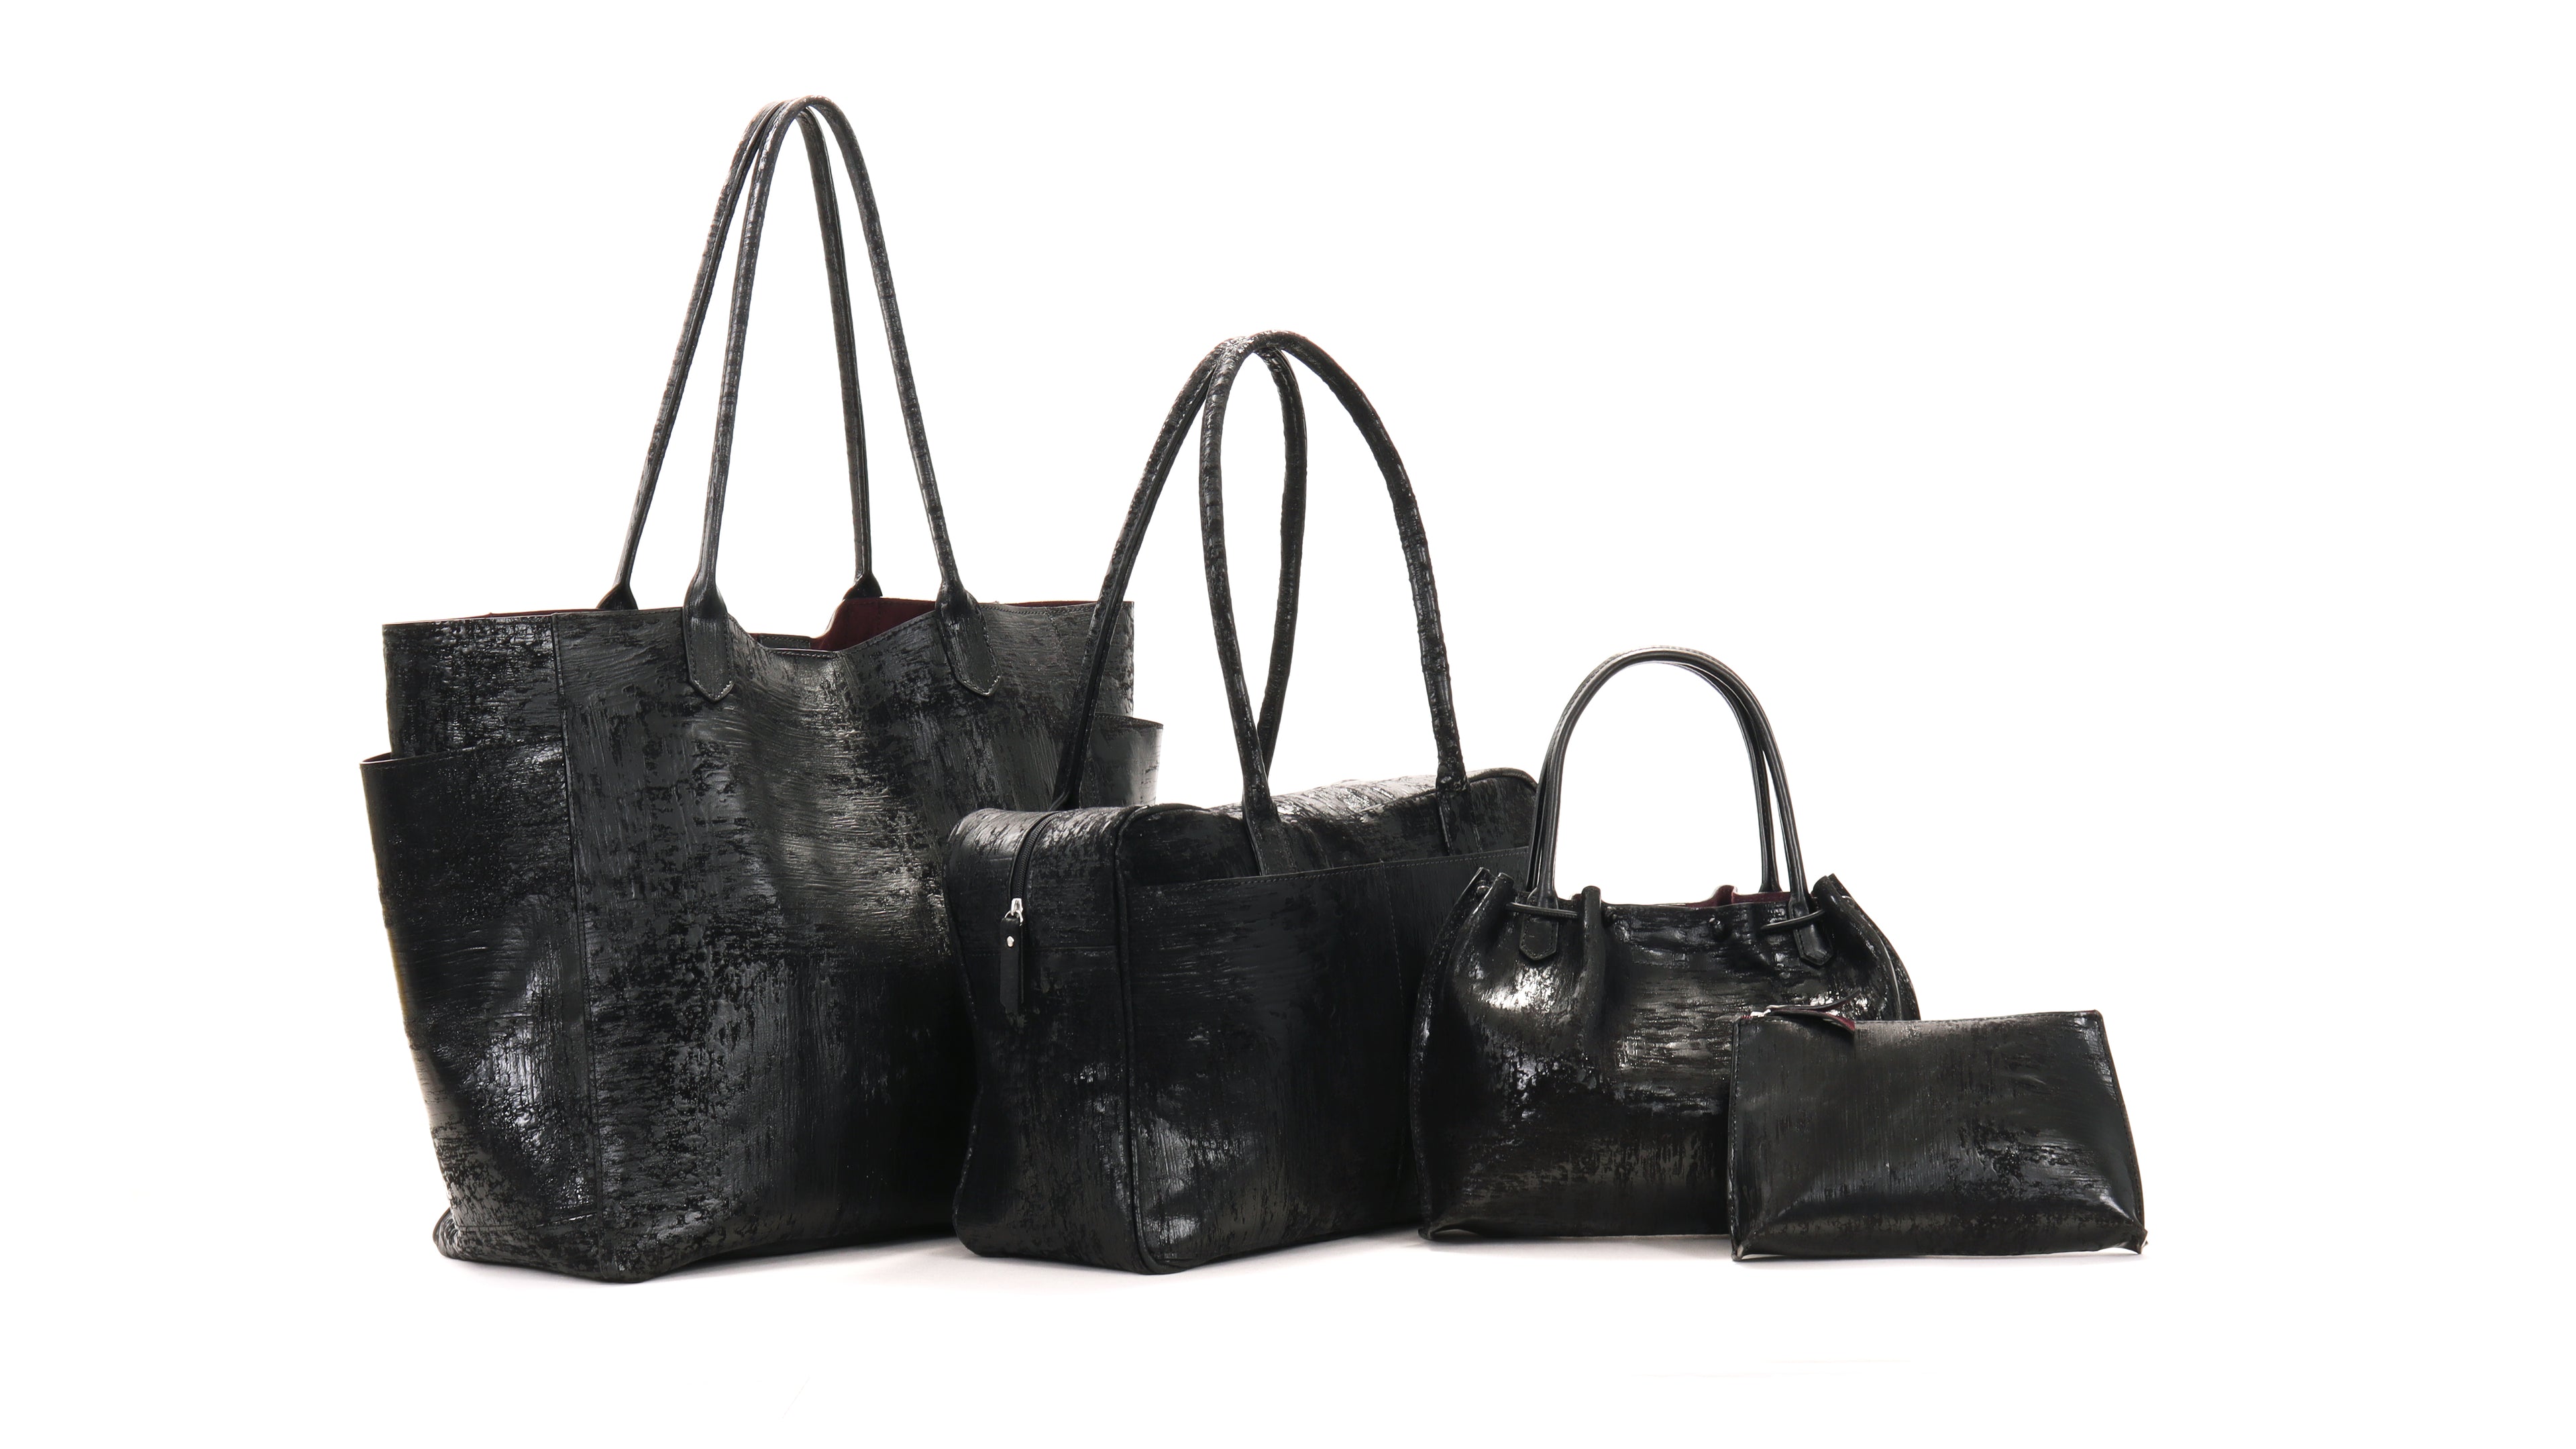 B.MAY BAGS - Luxury Leather Bags & Accessories hand-made in Michigan